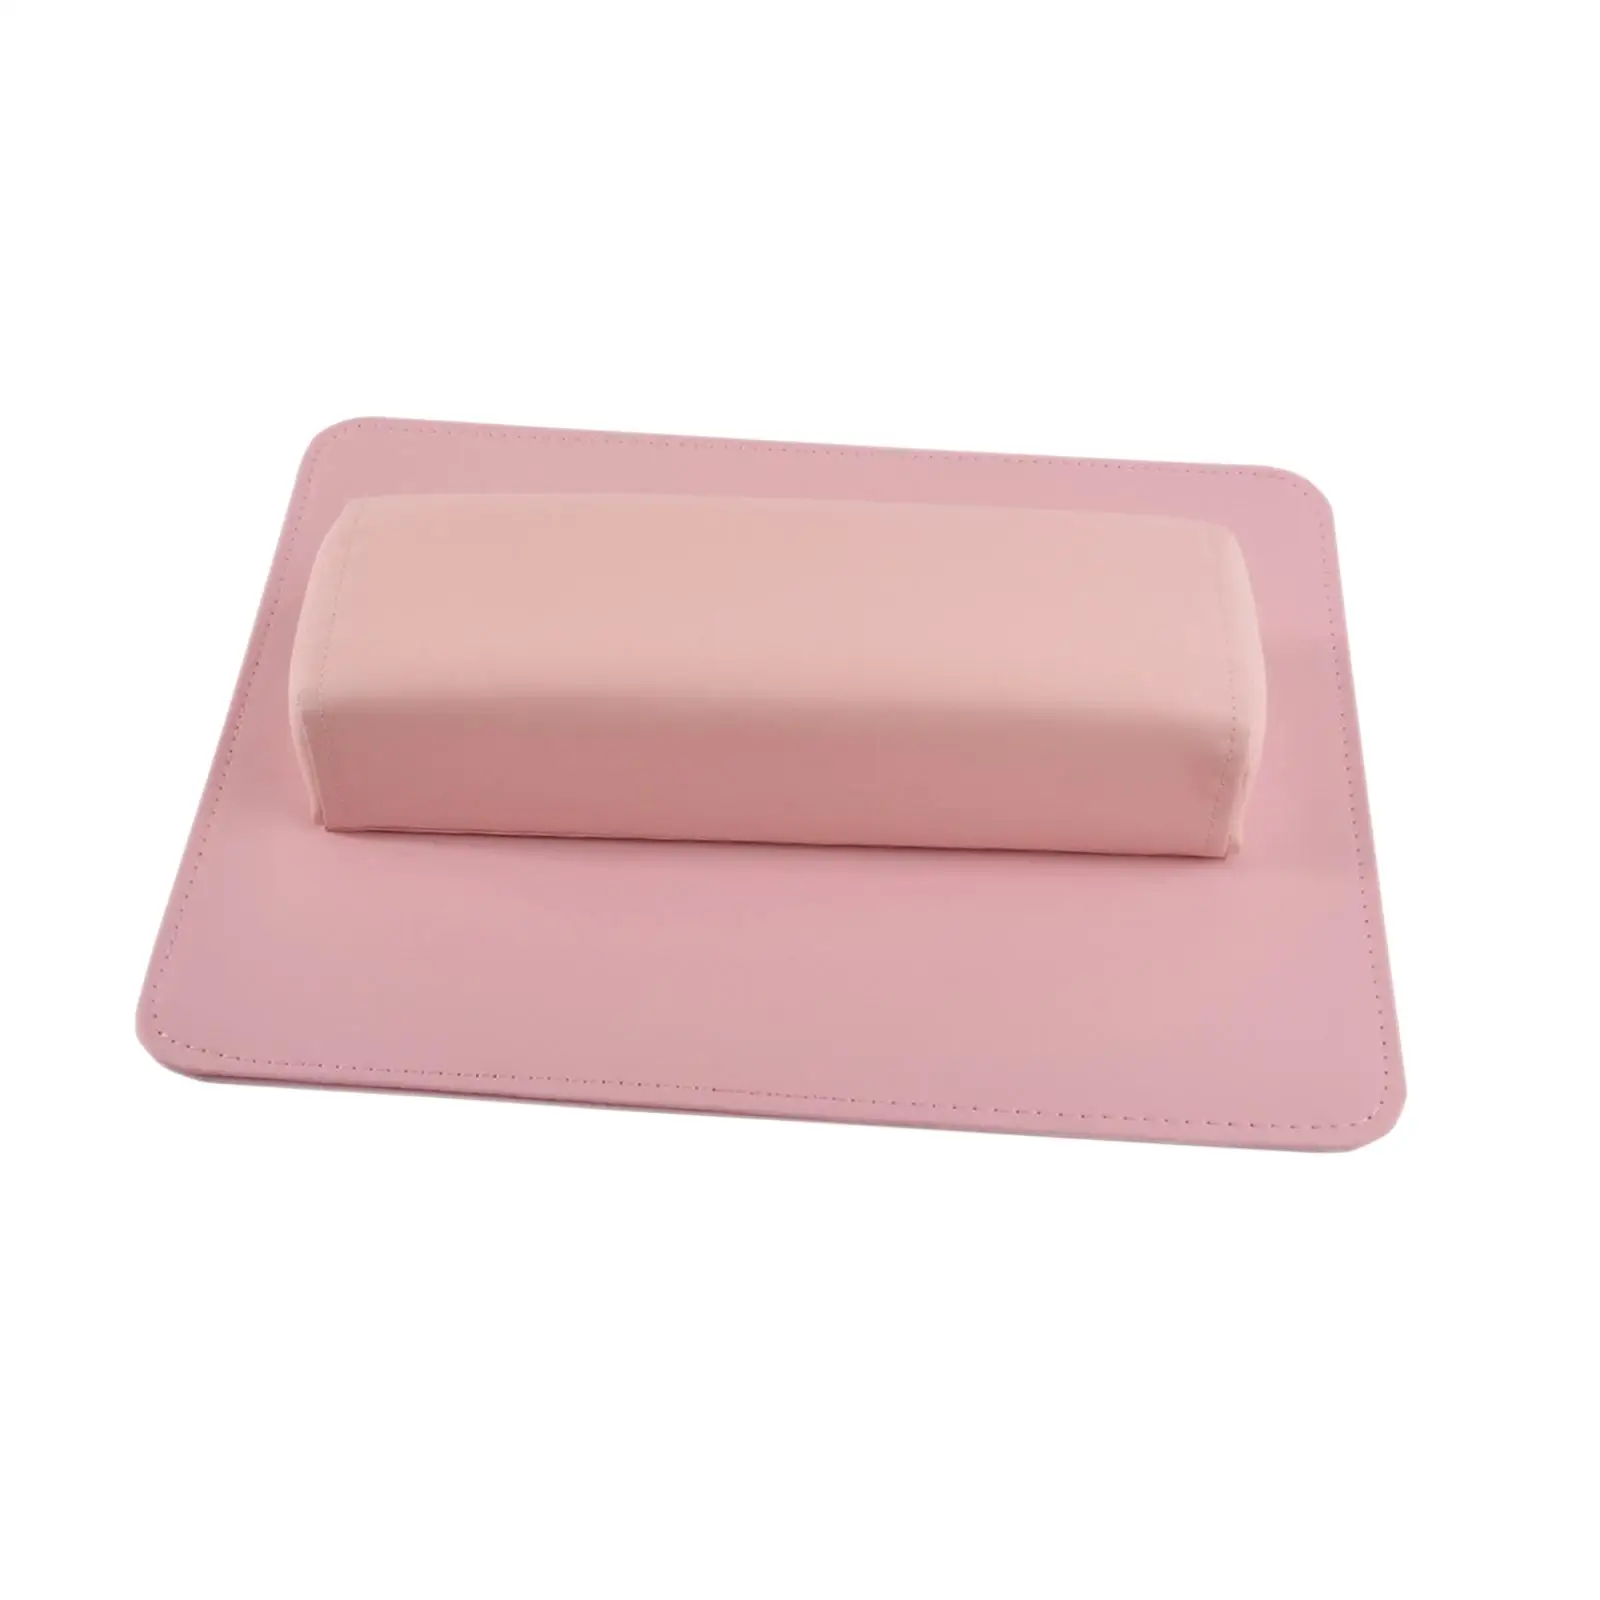 Nail Art Hand Pillow and Mat Comfortable PU Leather Hand Cushion Nail Hand Rest Nail Table Mat for Manicurist Home Salon